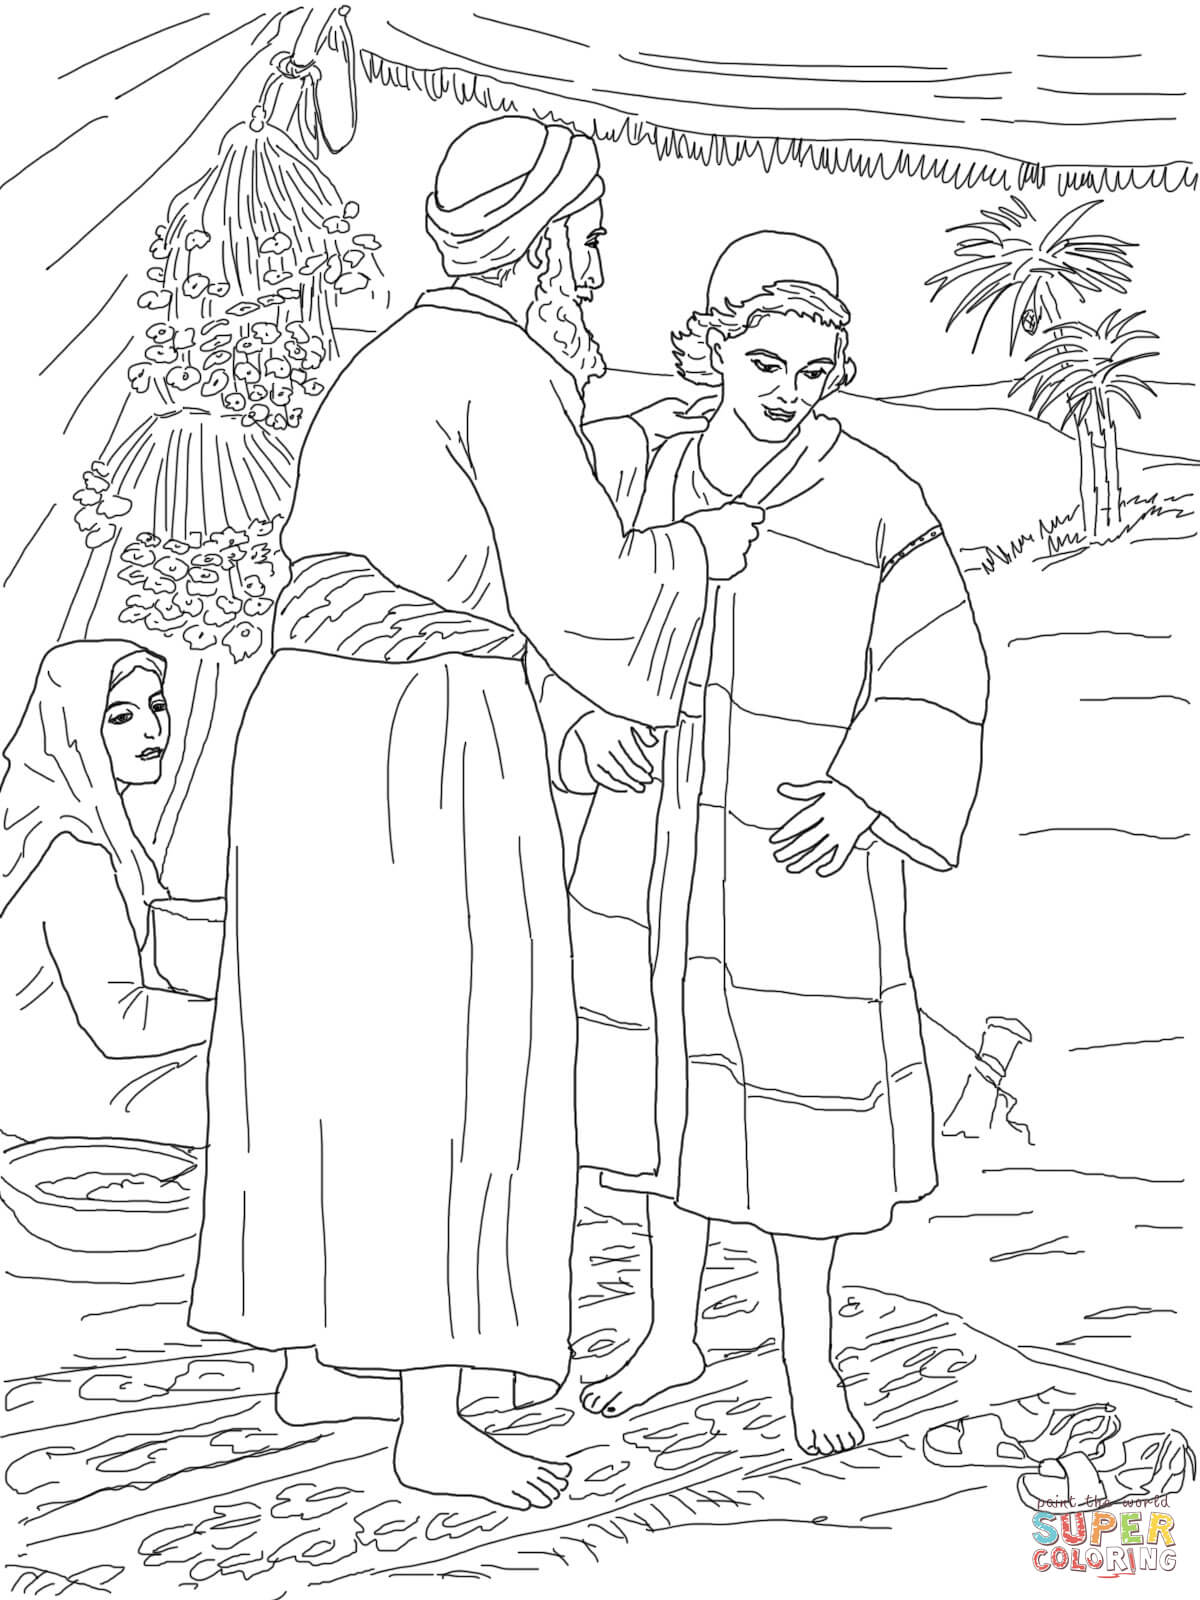 Jacob Giving Joseph the Coat of Many Colors coloring page | Free ...